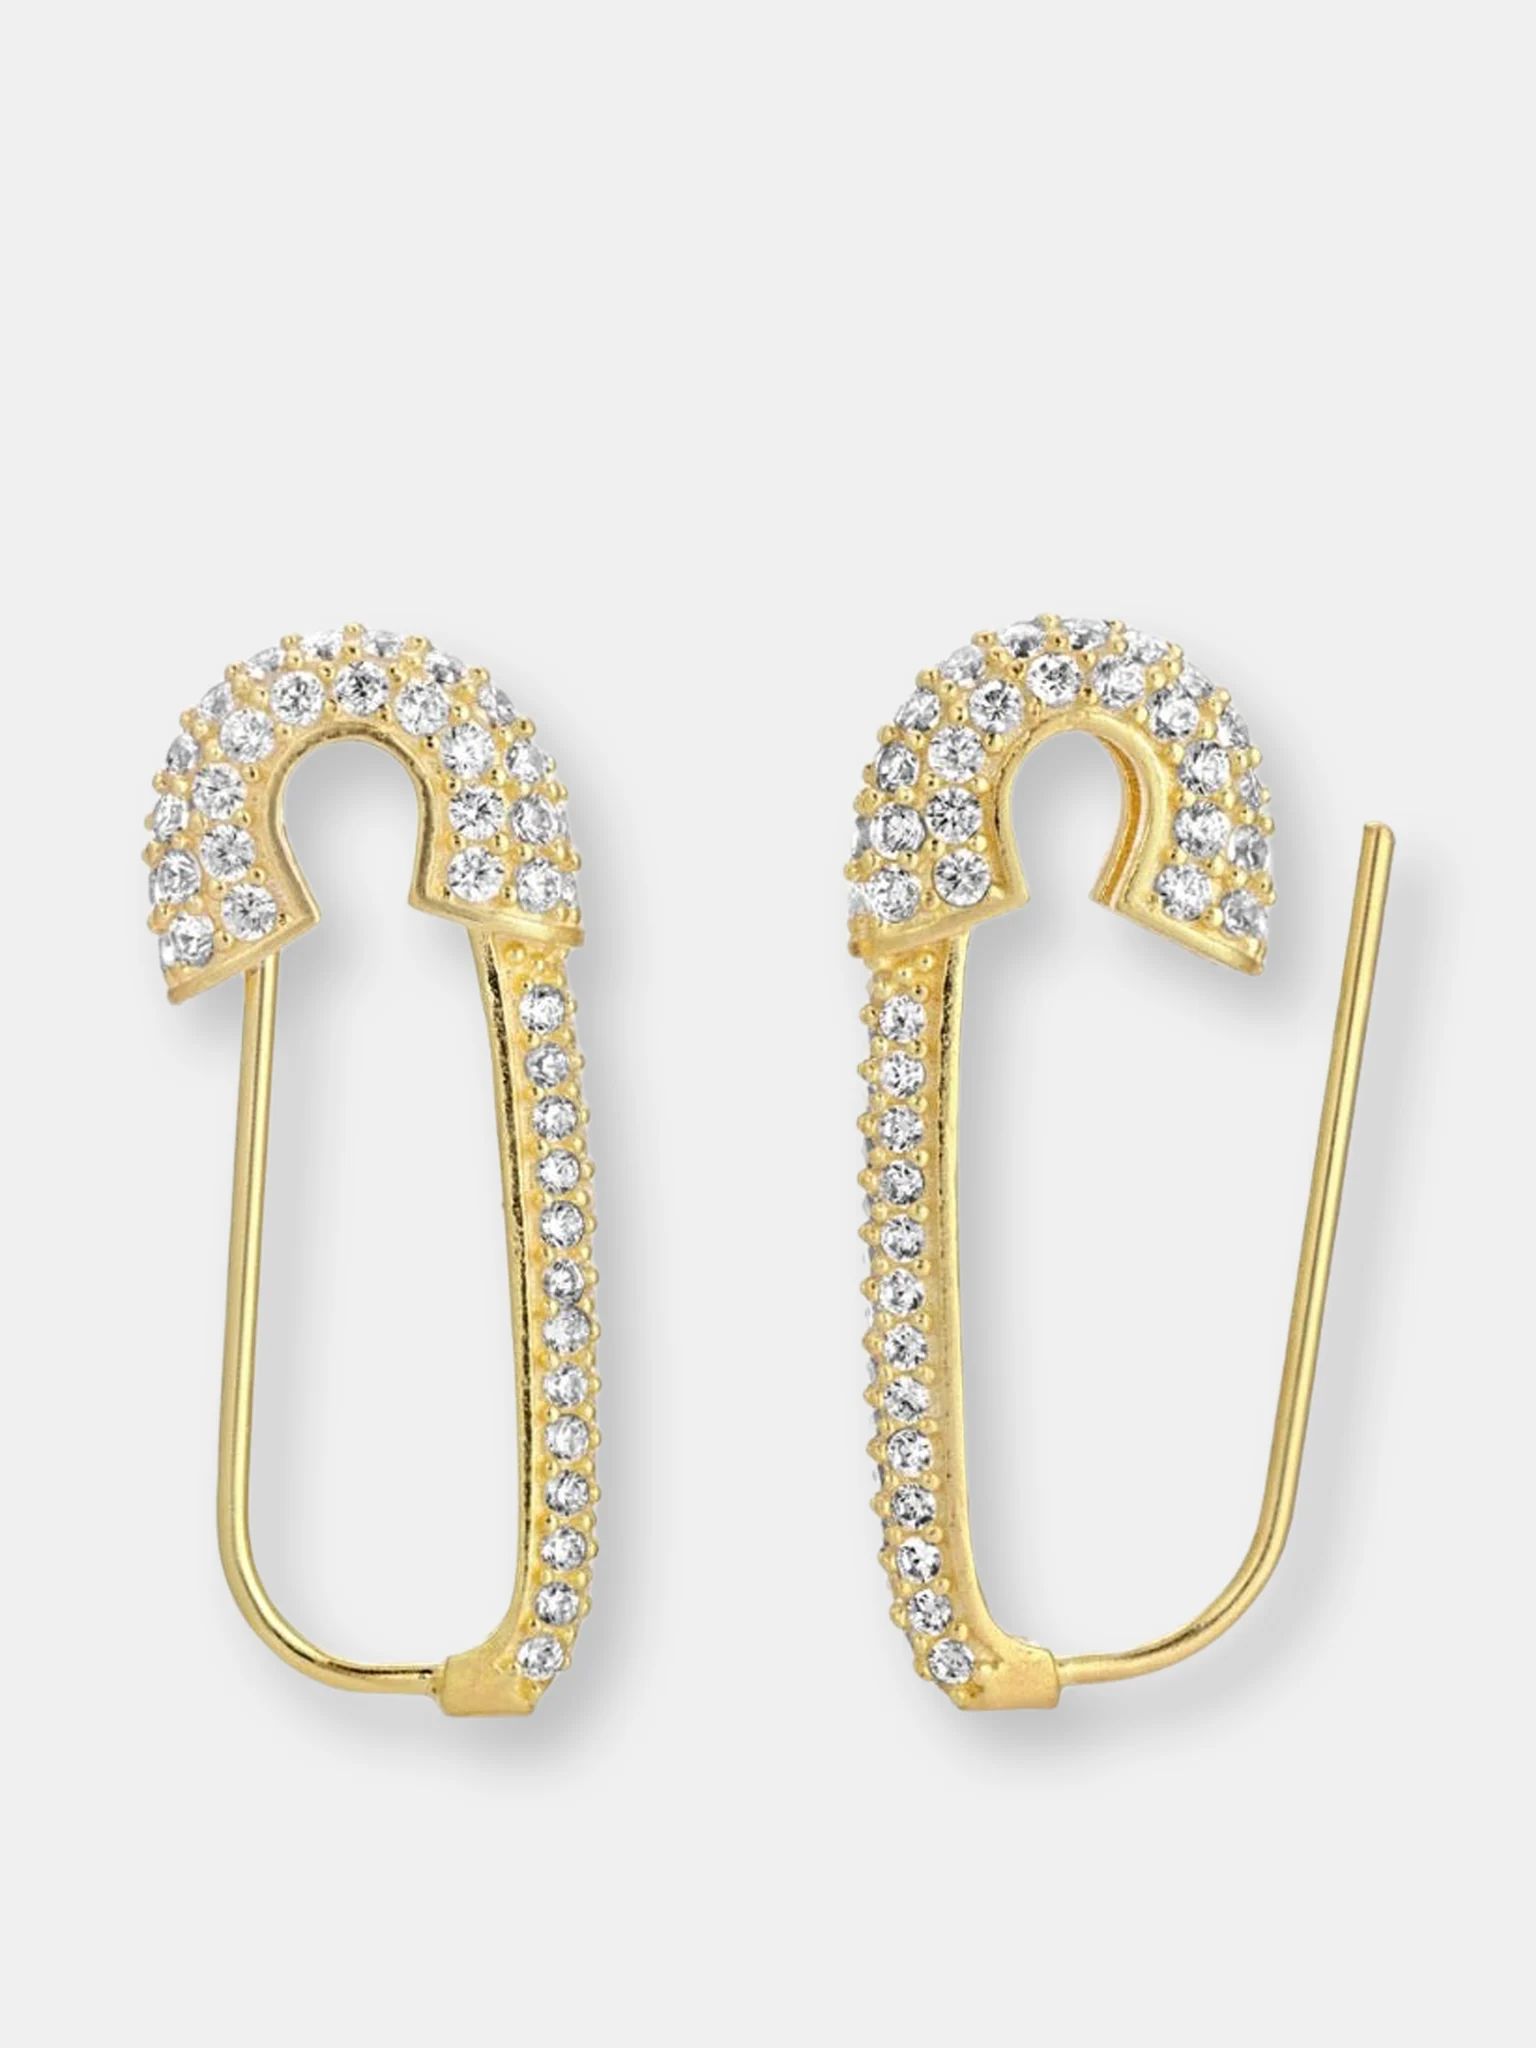 ESSENTIALS JEWELS Safety Pin Earrings | Verishop